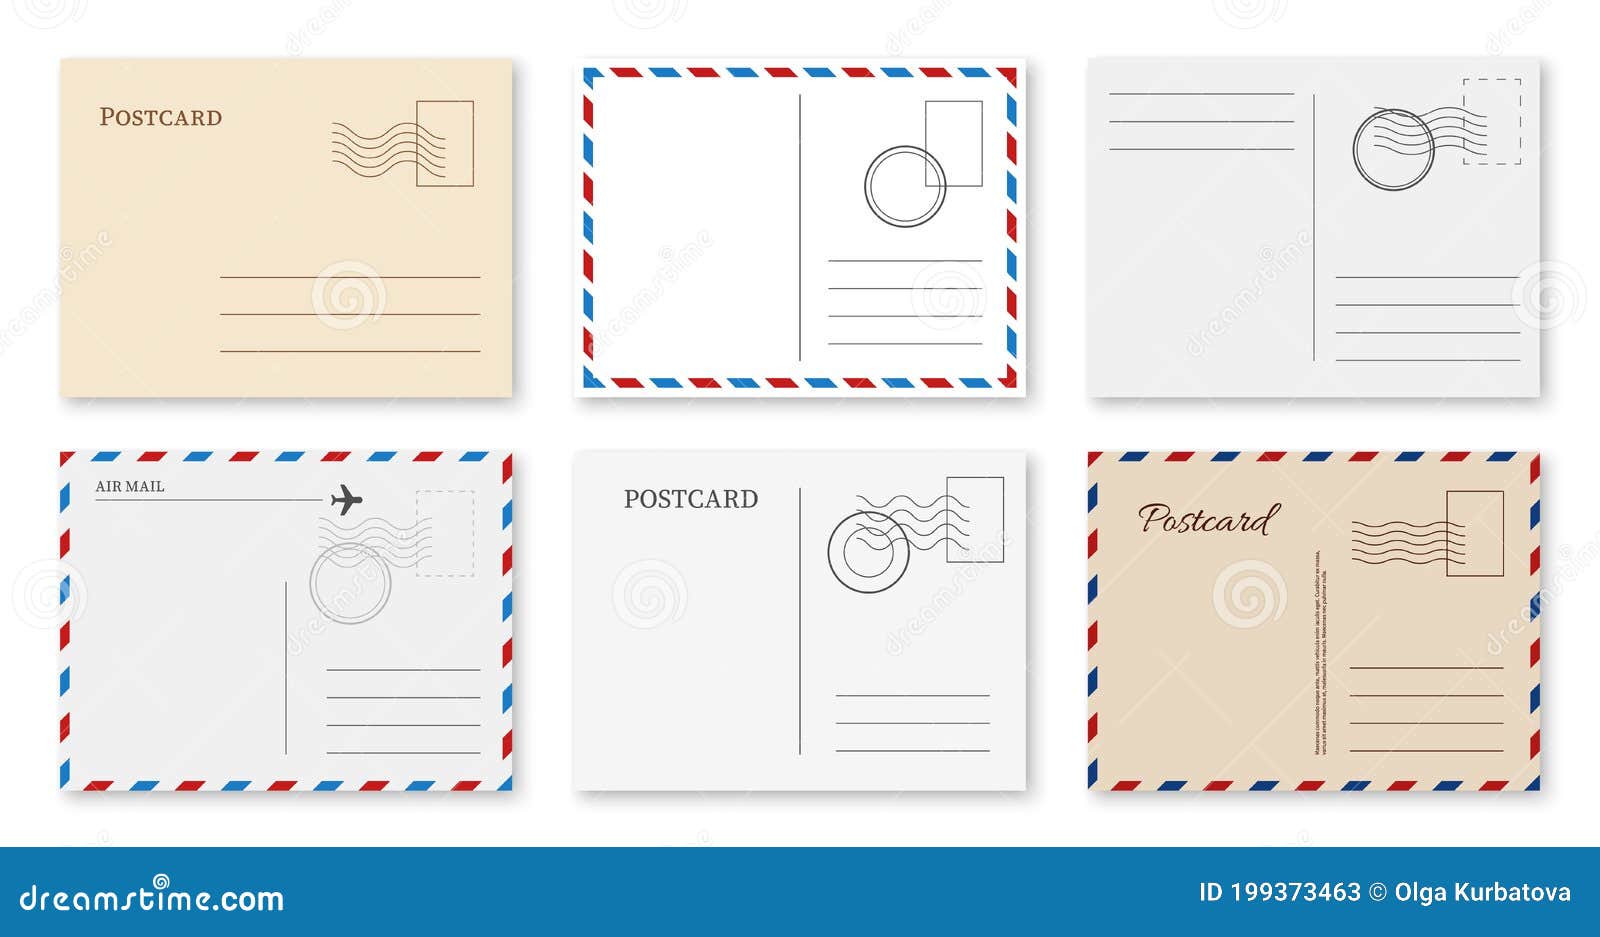 postcard template. blank vintage postal card with post stamp for greeting message, invitation letter posting report of